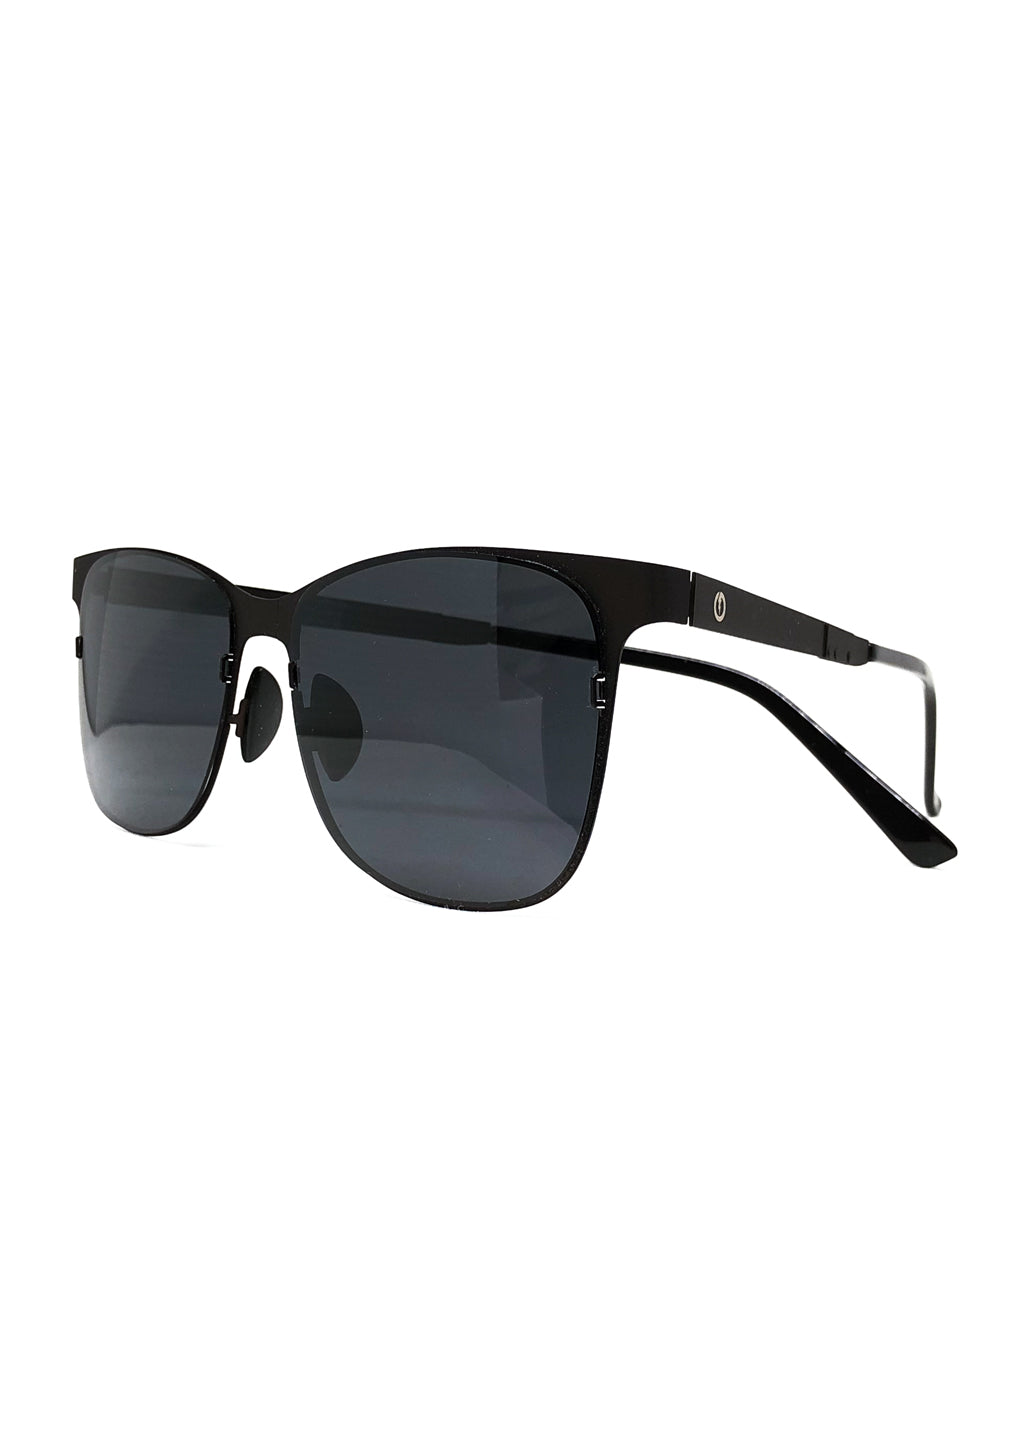 Foldable sunglasses - Rover classic wayfarer design - Photo from the side